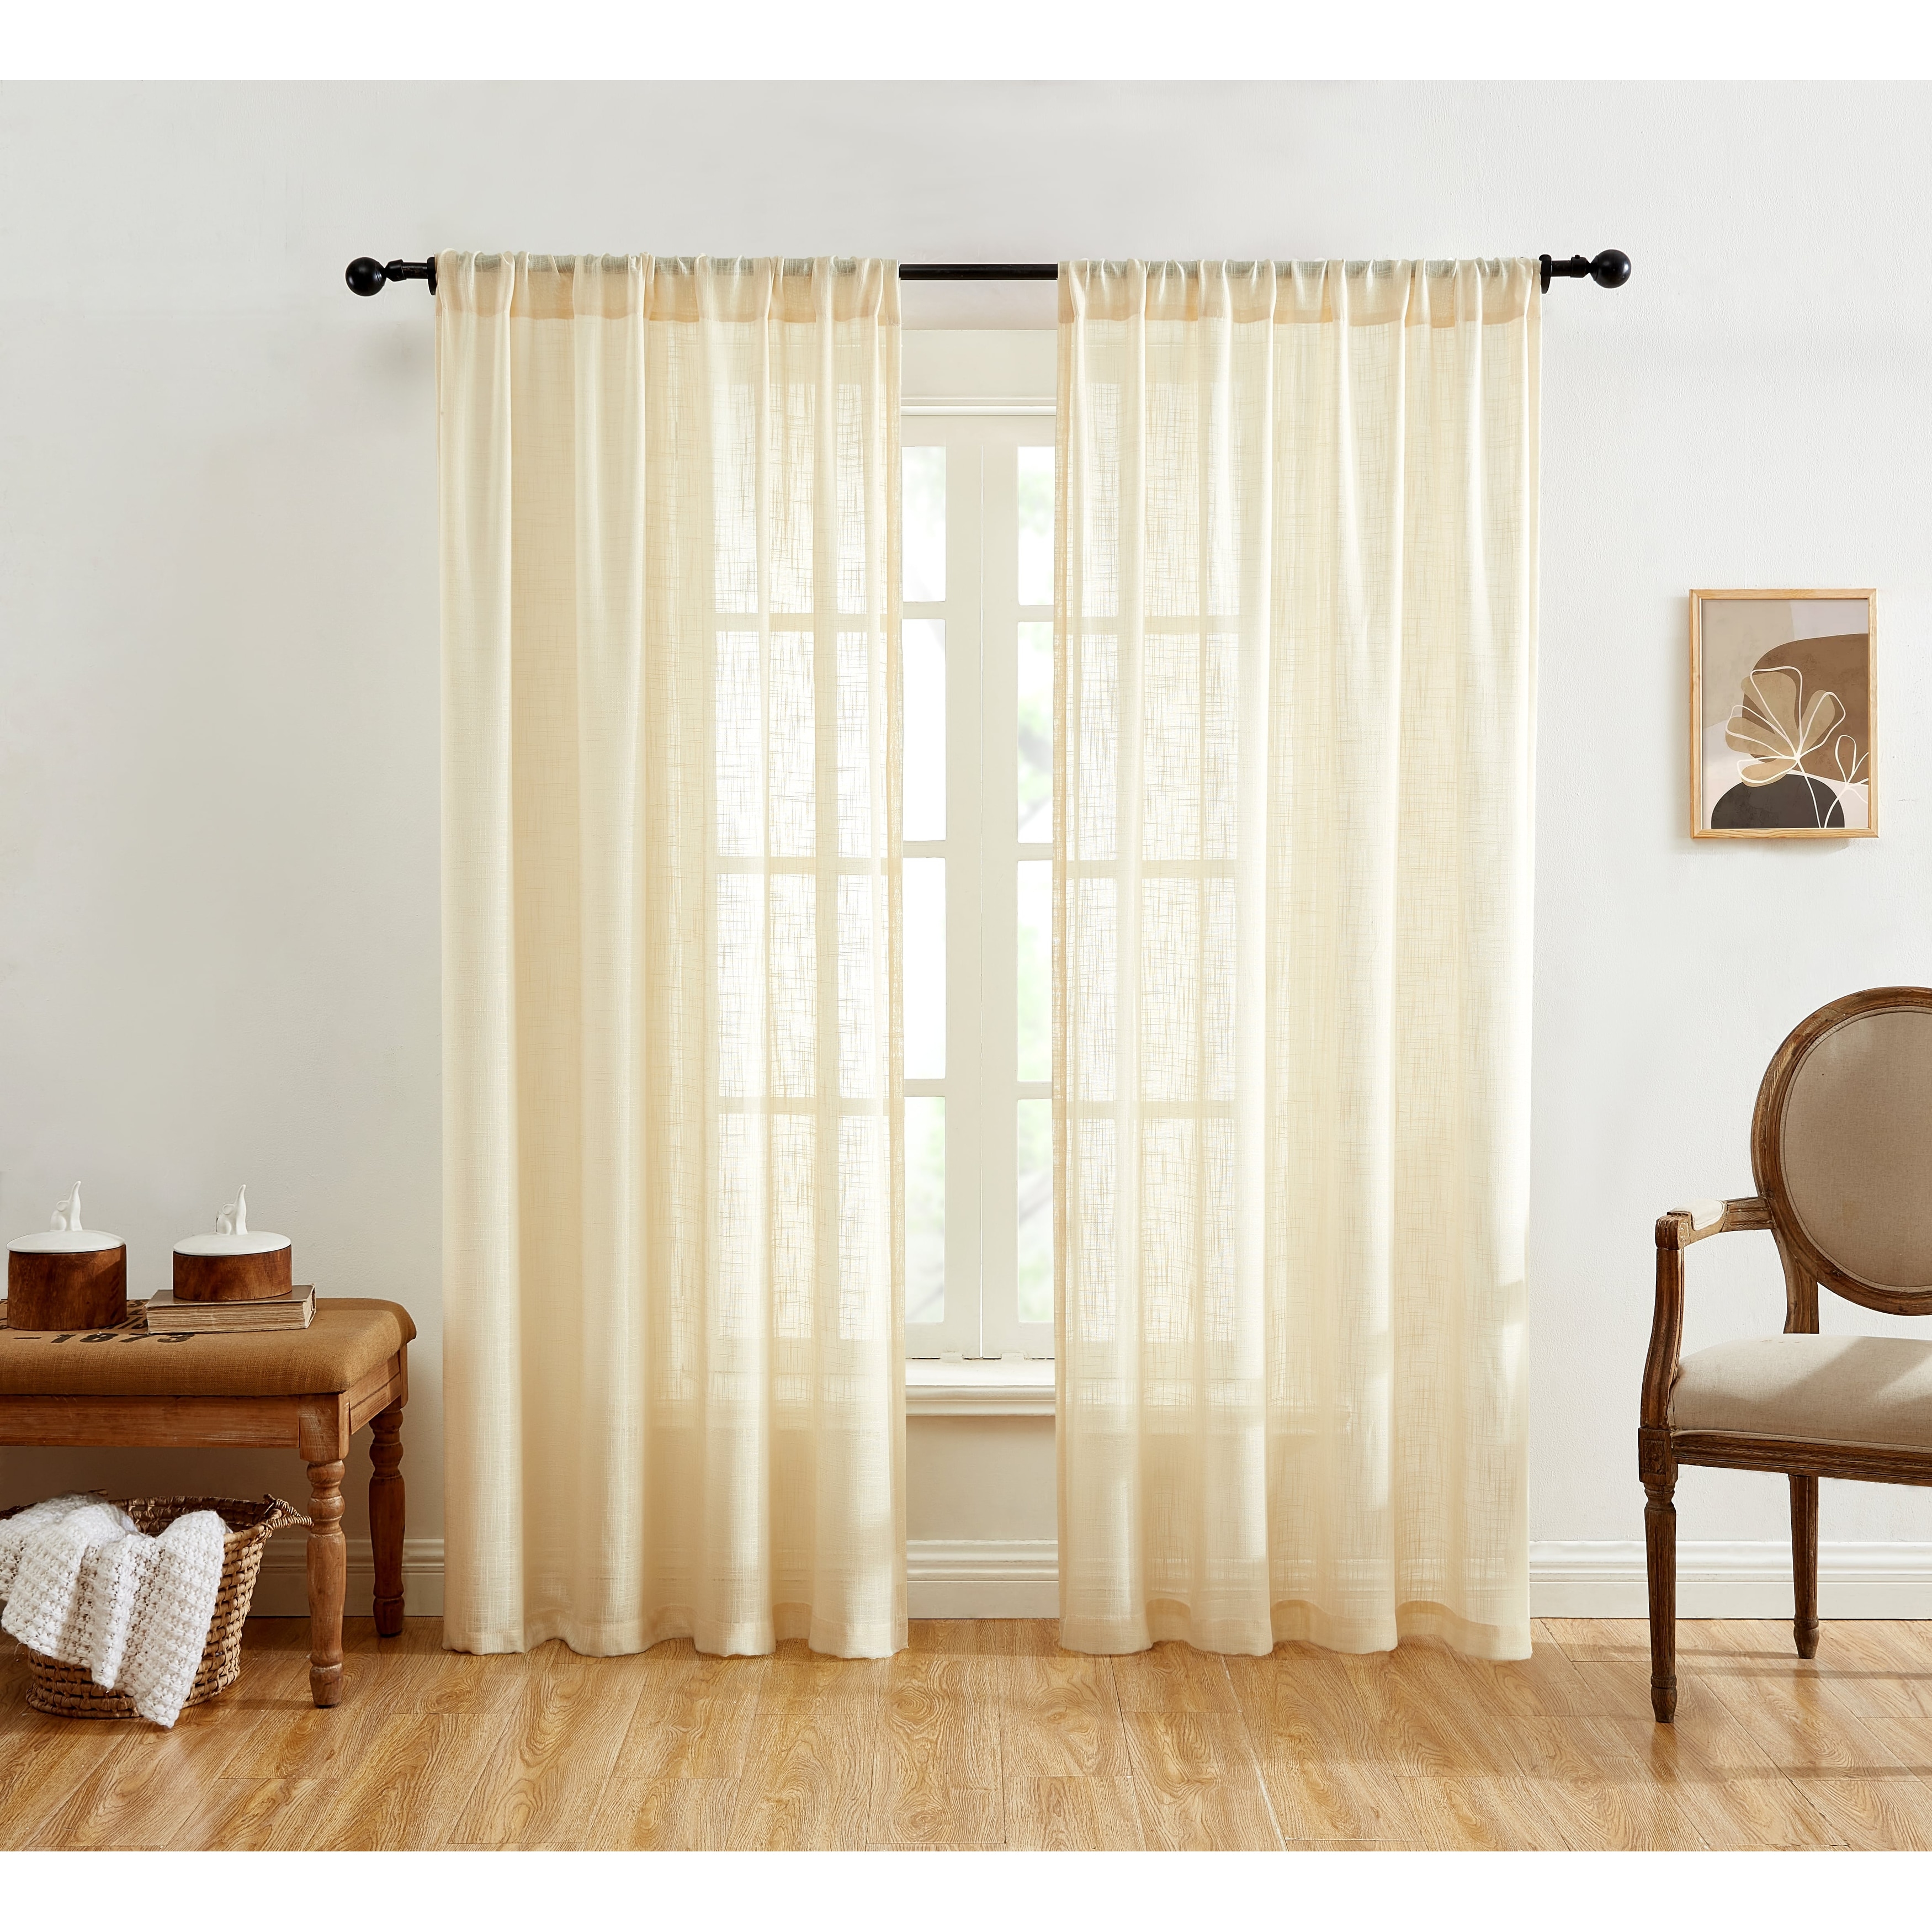 Home & Linens Warsaw Faux Linen Textured Semi Sheer Privacy Sun Light Filtering Window Rod Pocket Curtains Panels, 2 Panel